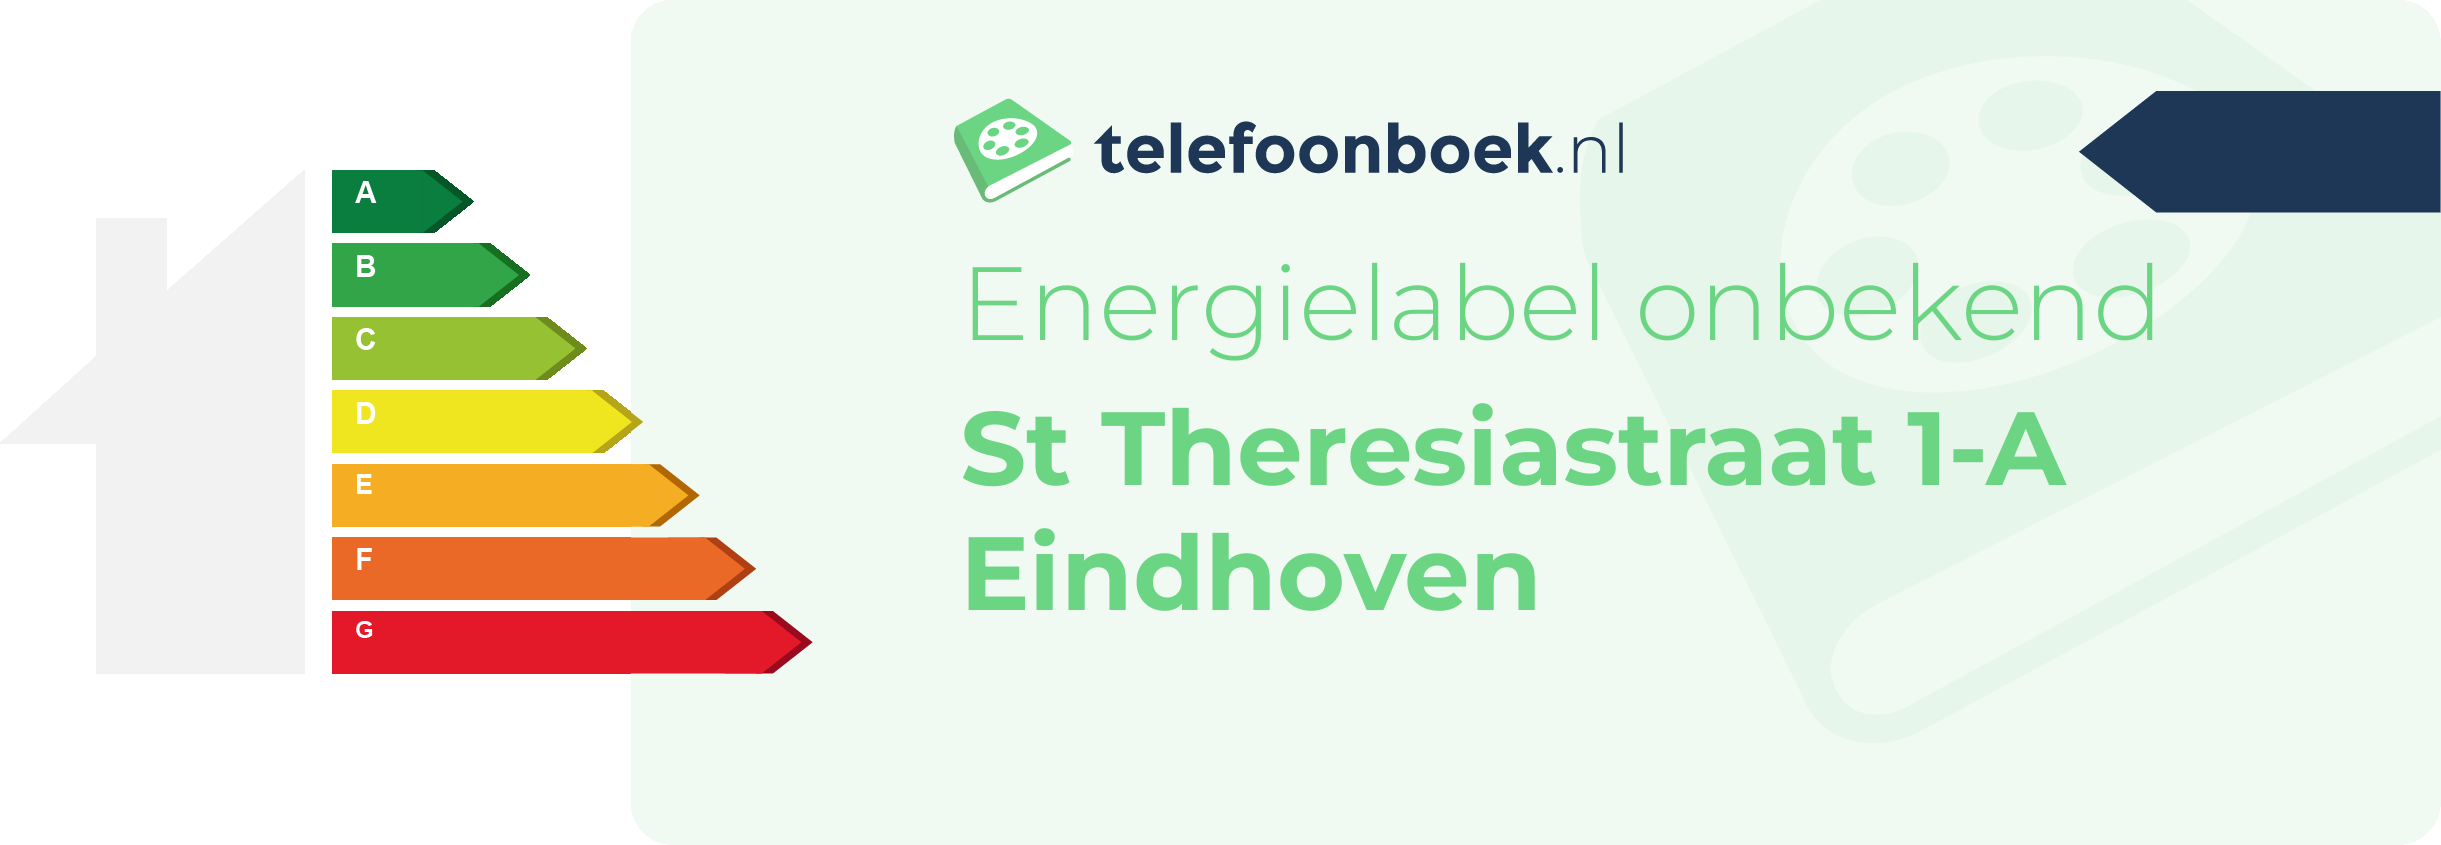 Energielabel St Theresiastraat 1-A Eindhoven